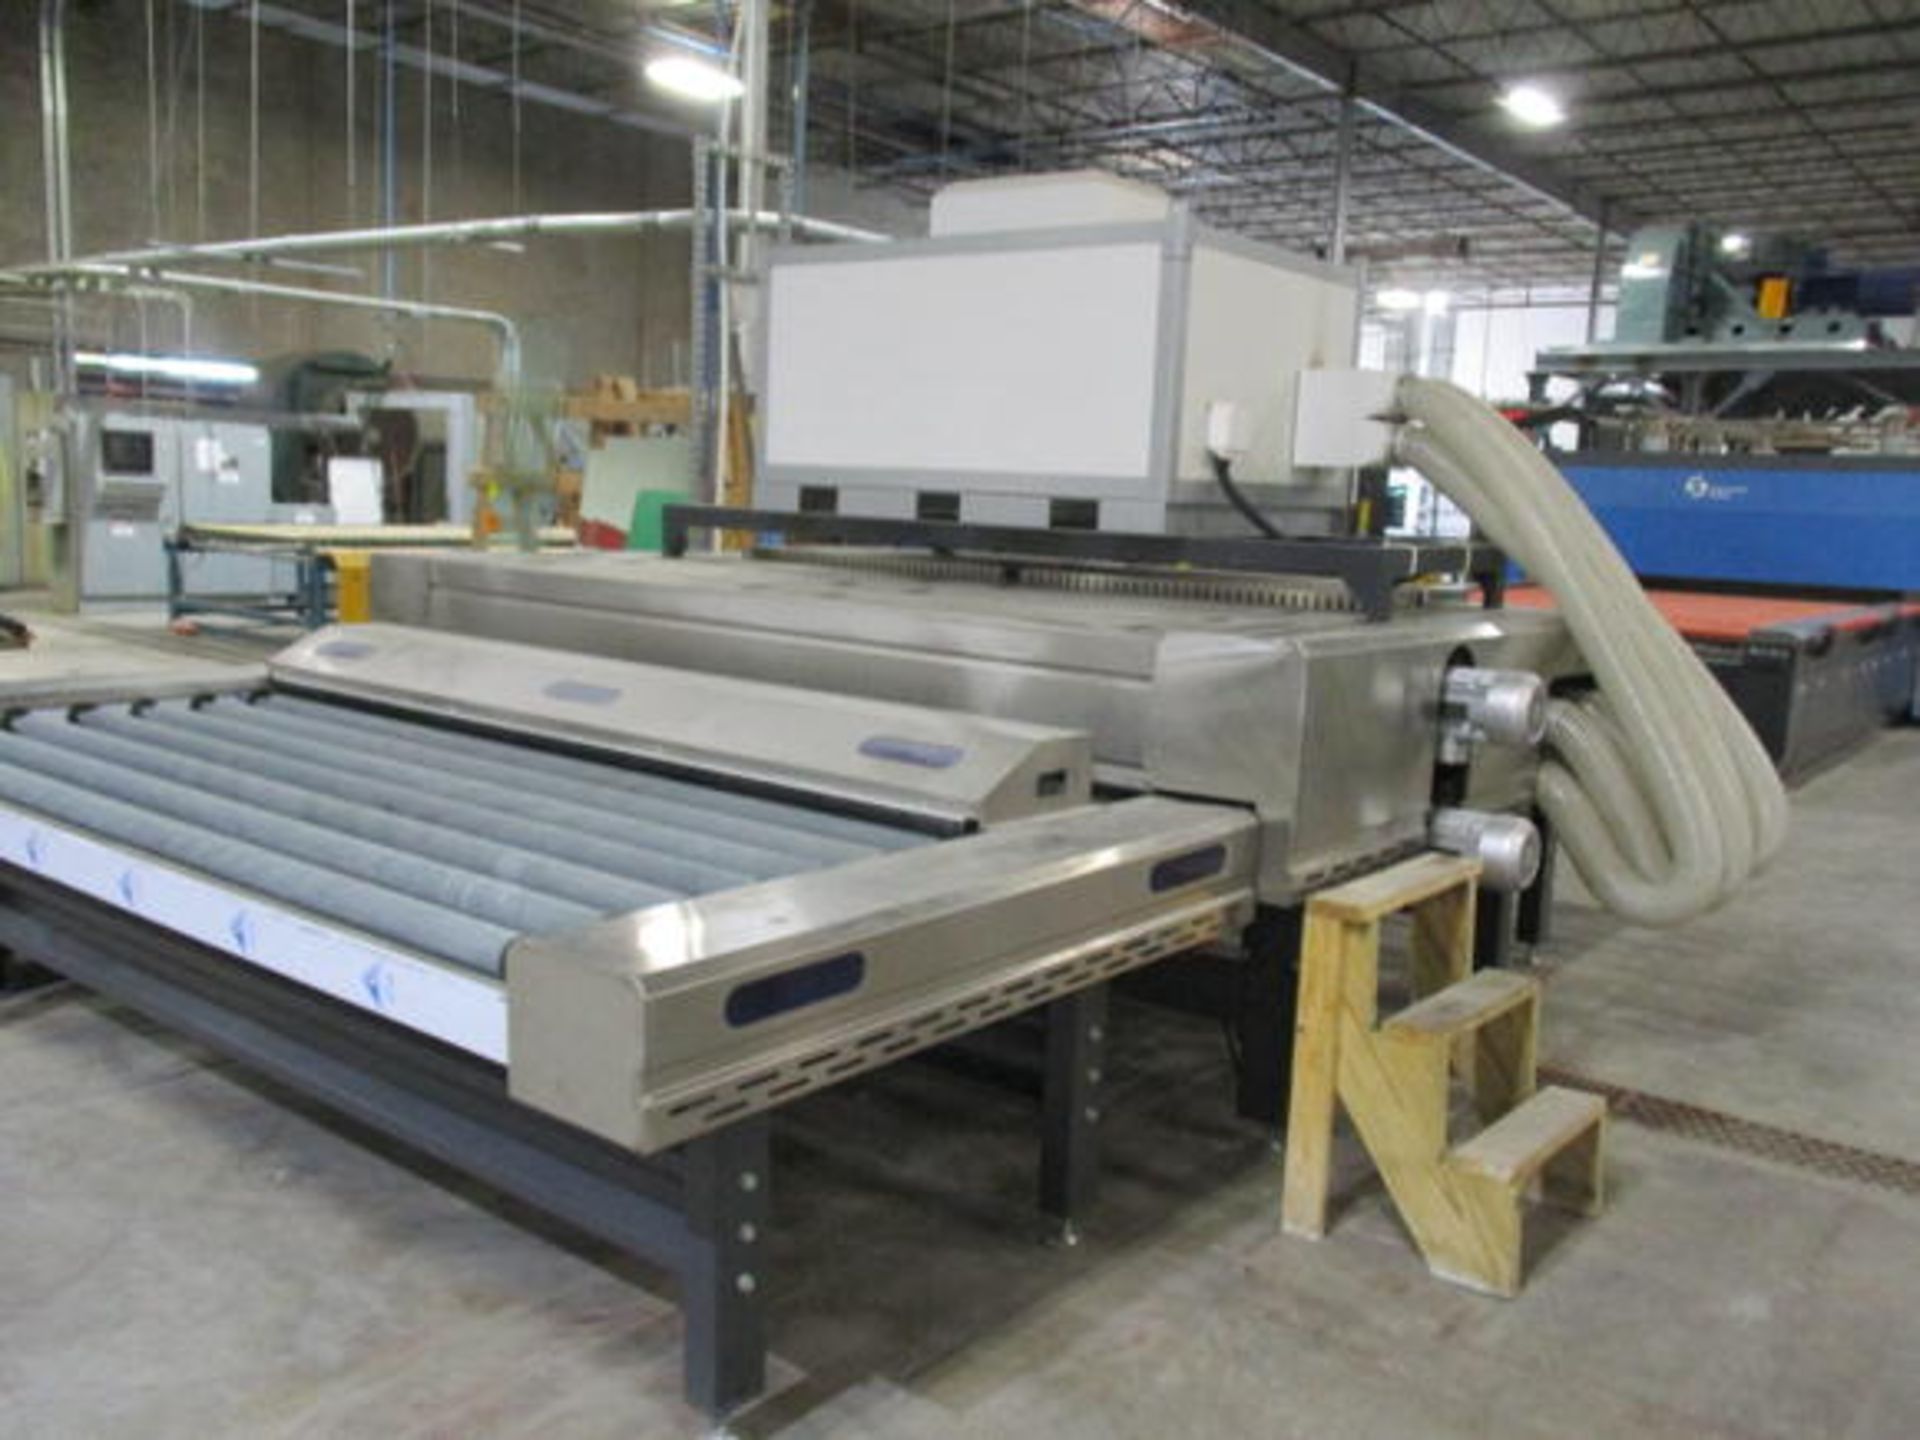 2023 WINTEC WTO/2500 GLASS WASHER, 96" CAP, 480V, SPEED: 0-12 M/MIN, THICKNESS 3-20MM - Image 4 of 13